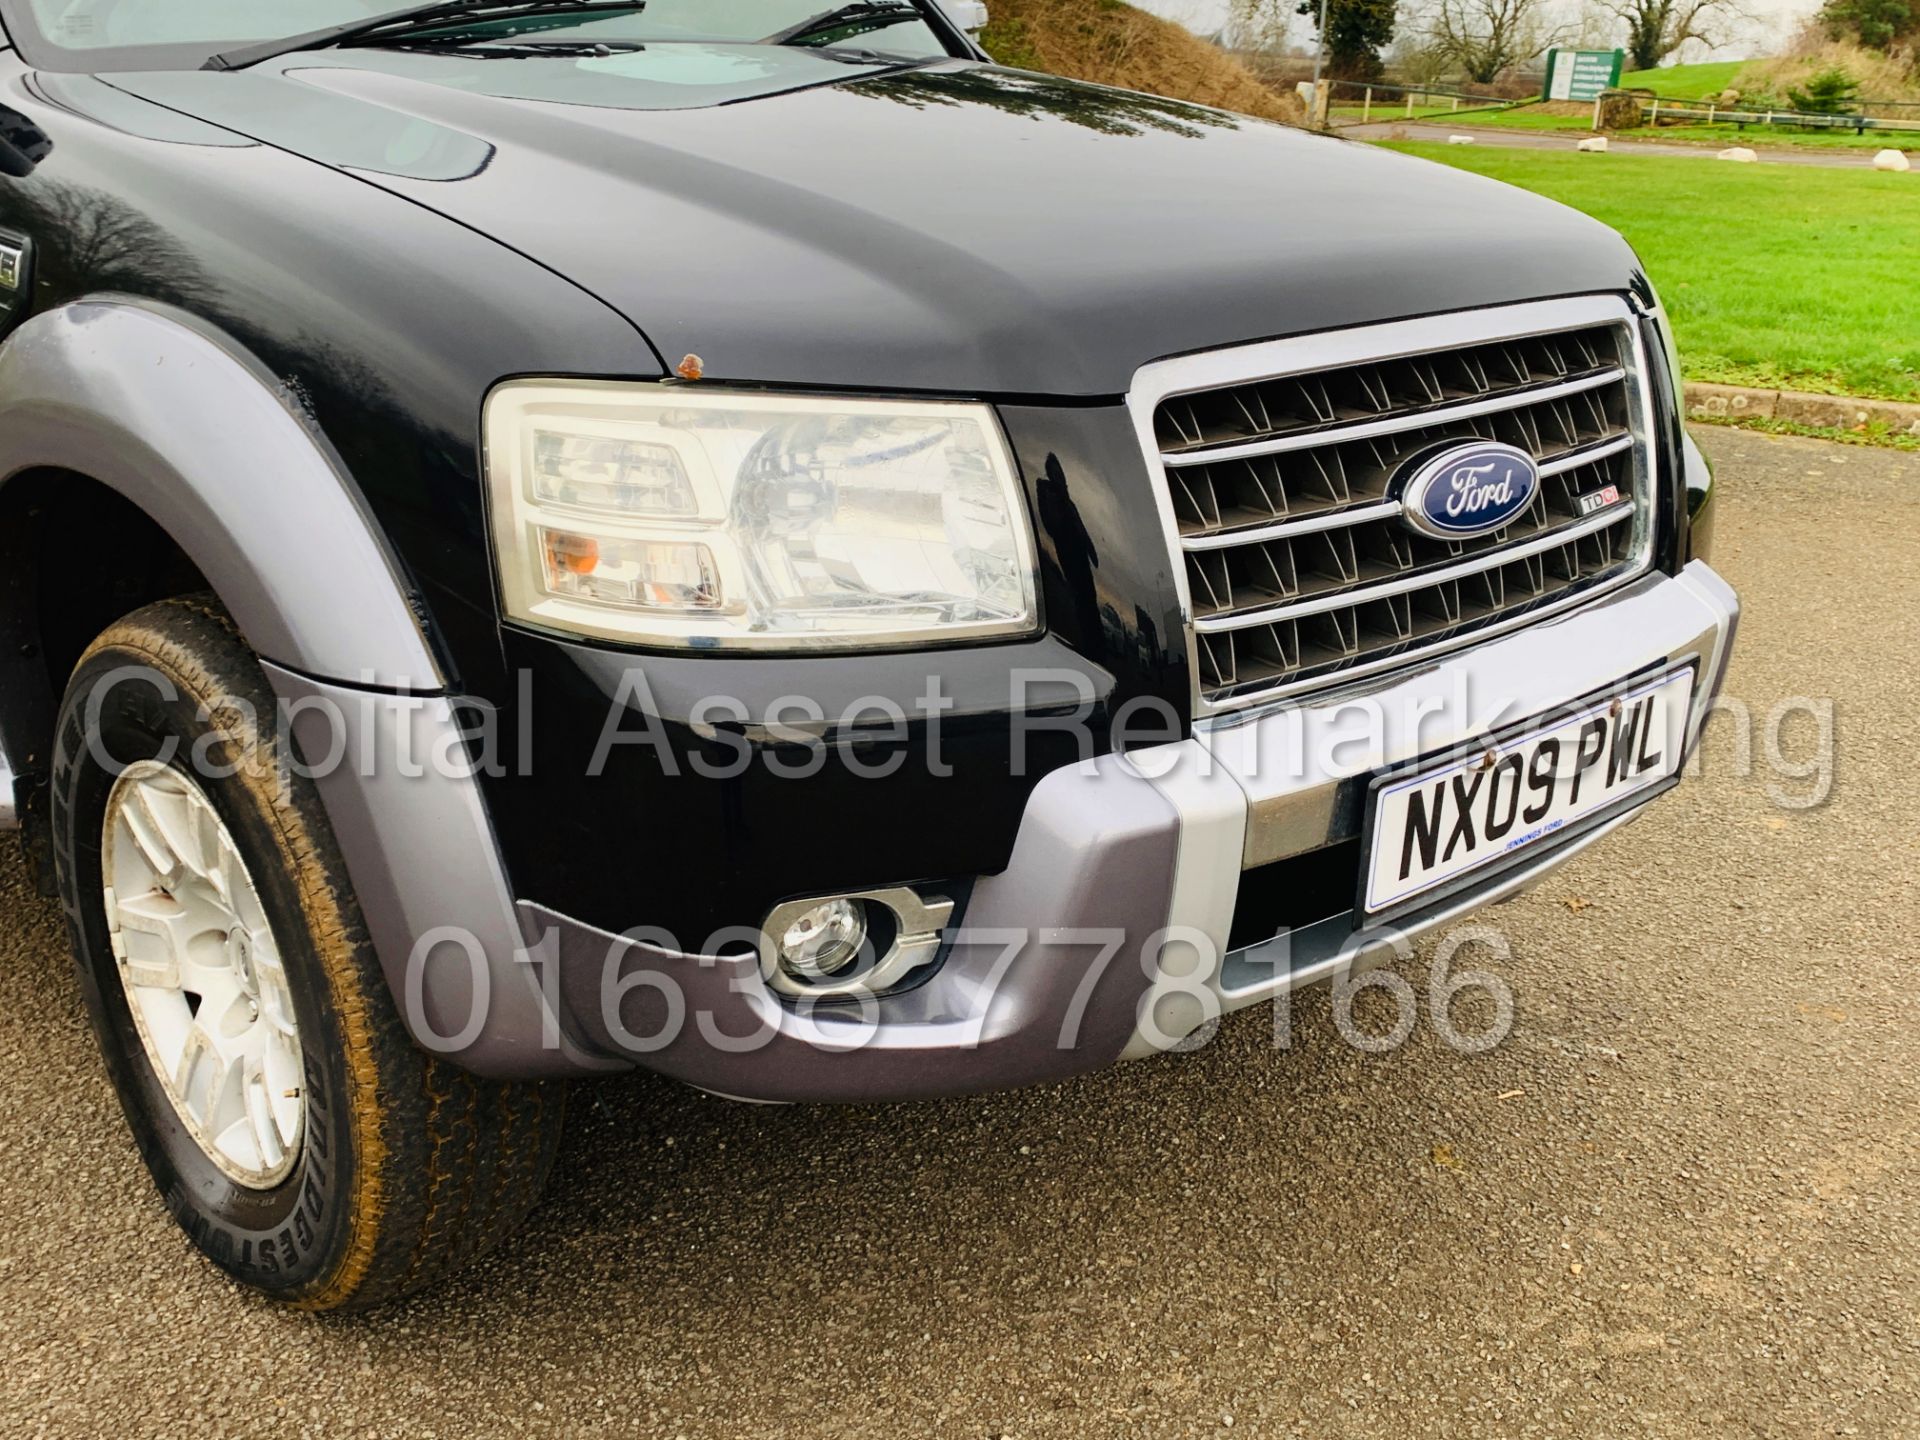 FORD RANGER *WILDTRAK* DOUBLE CAB PICK-UP *4X4* (2009) '3.0 TDCI - 156 BHP* (FULLY LOADED) - Image 14 of 37